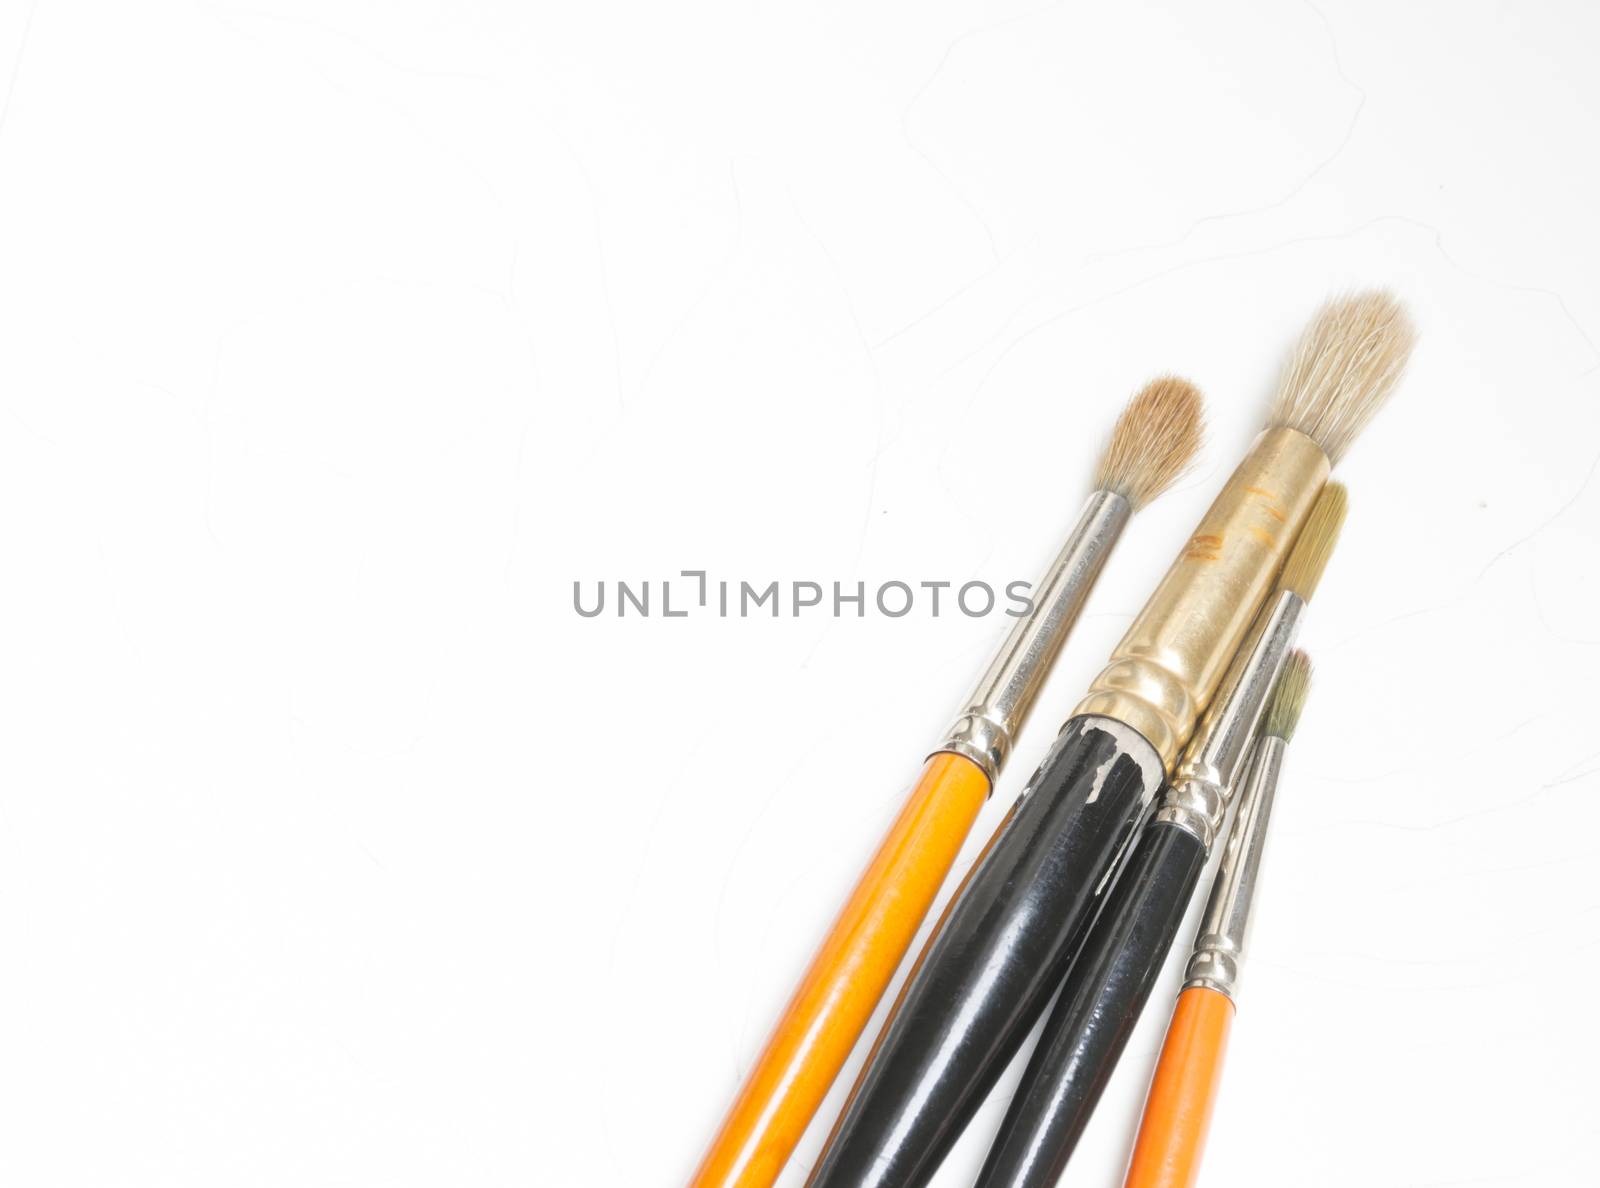 Watercolor brushes by ArtesiaWells